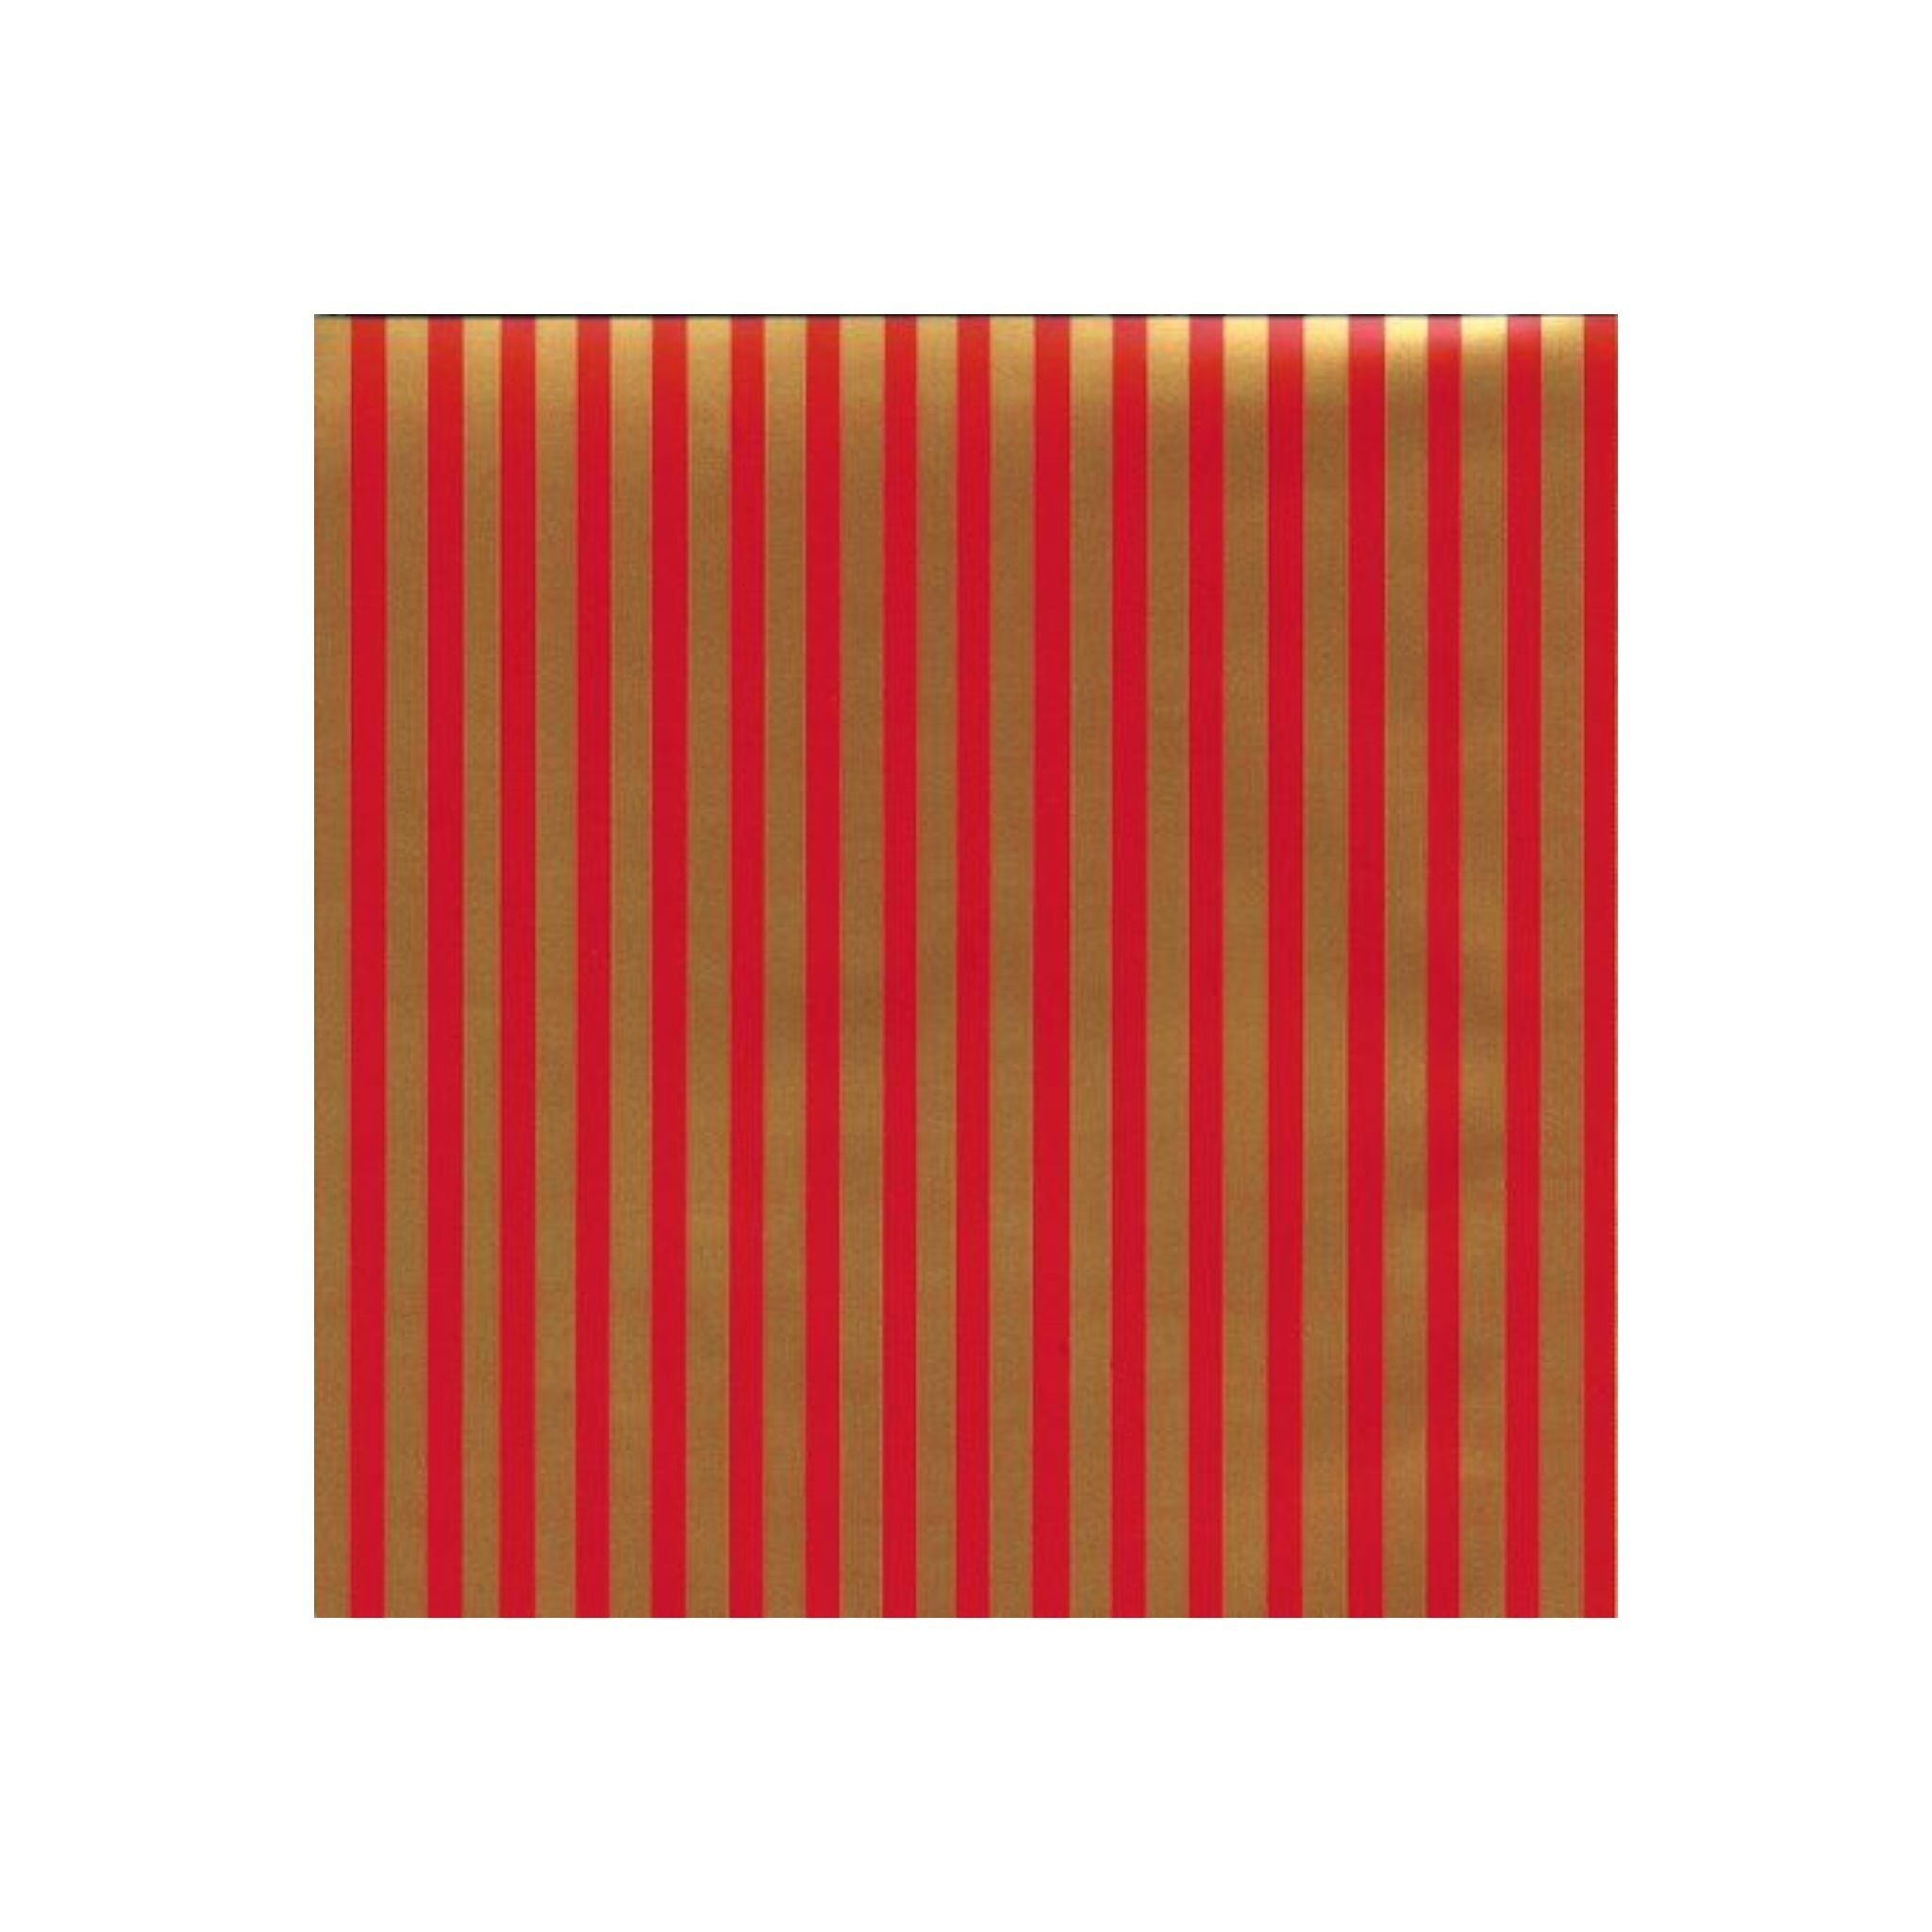 Gift Wrapping Counter Roll Broad Stripe Red-Gold 52gsm 490mmx100mtr